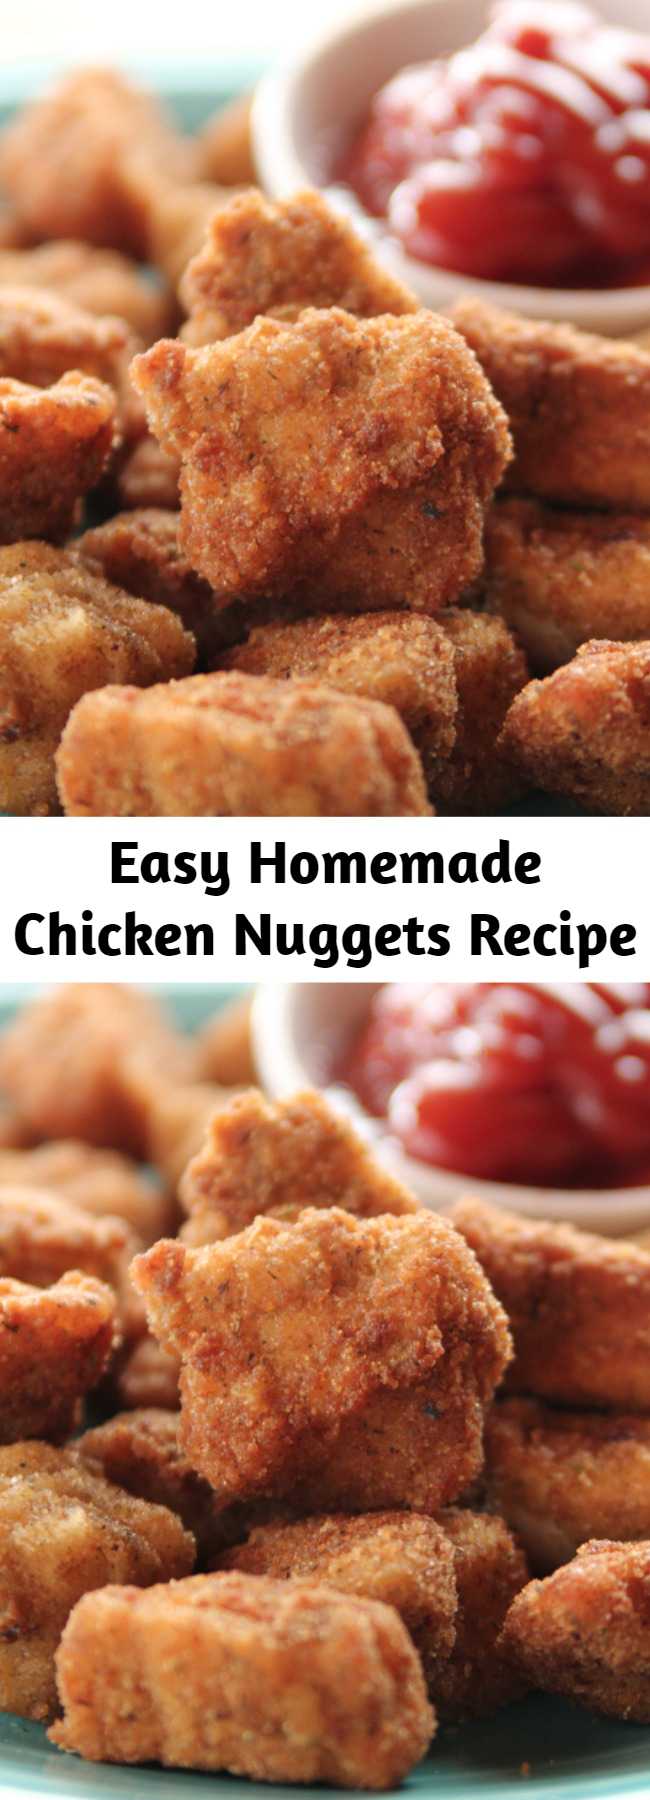 Easy Homemade Chicken Nuggets Recipe - Super easy to make and even more fun to eat!